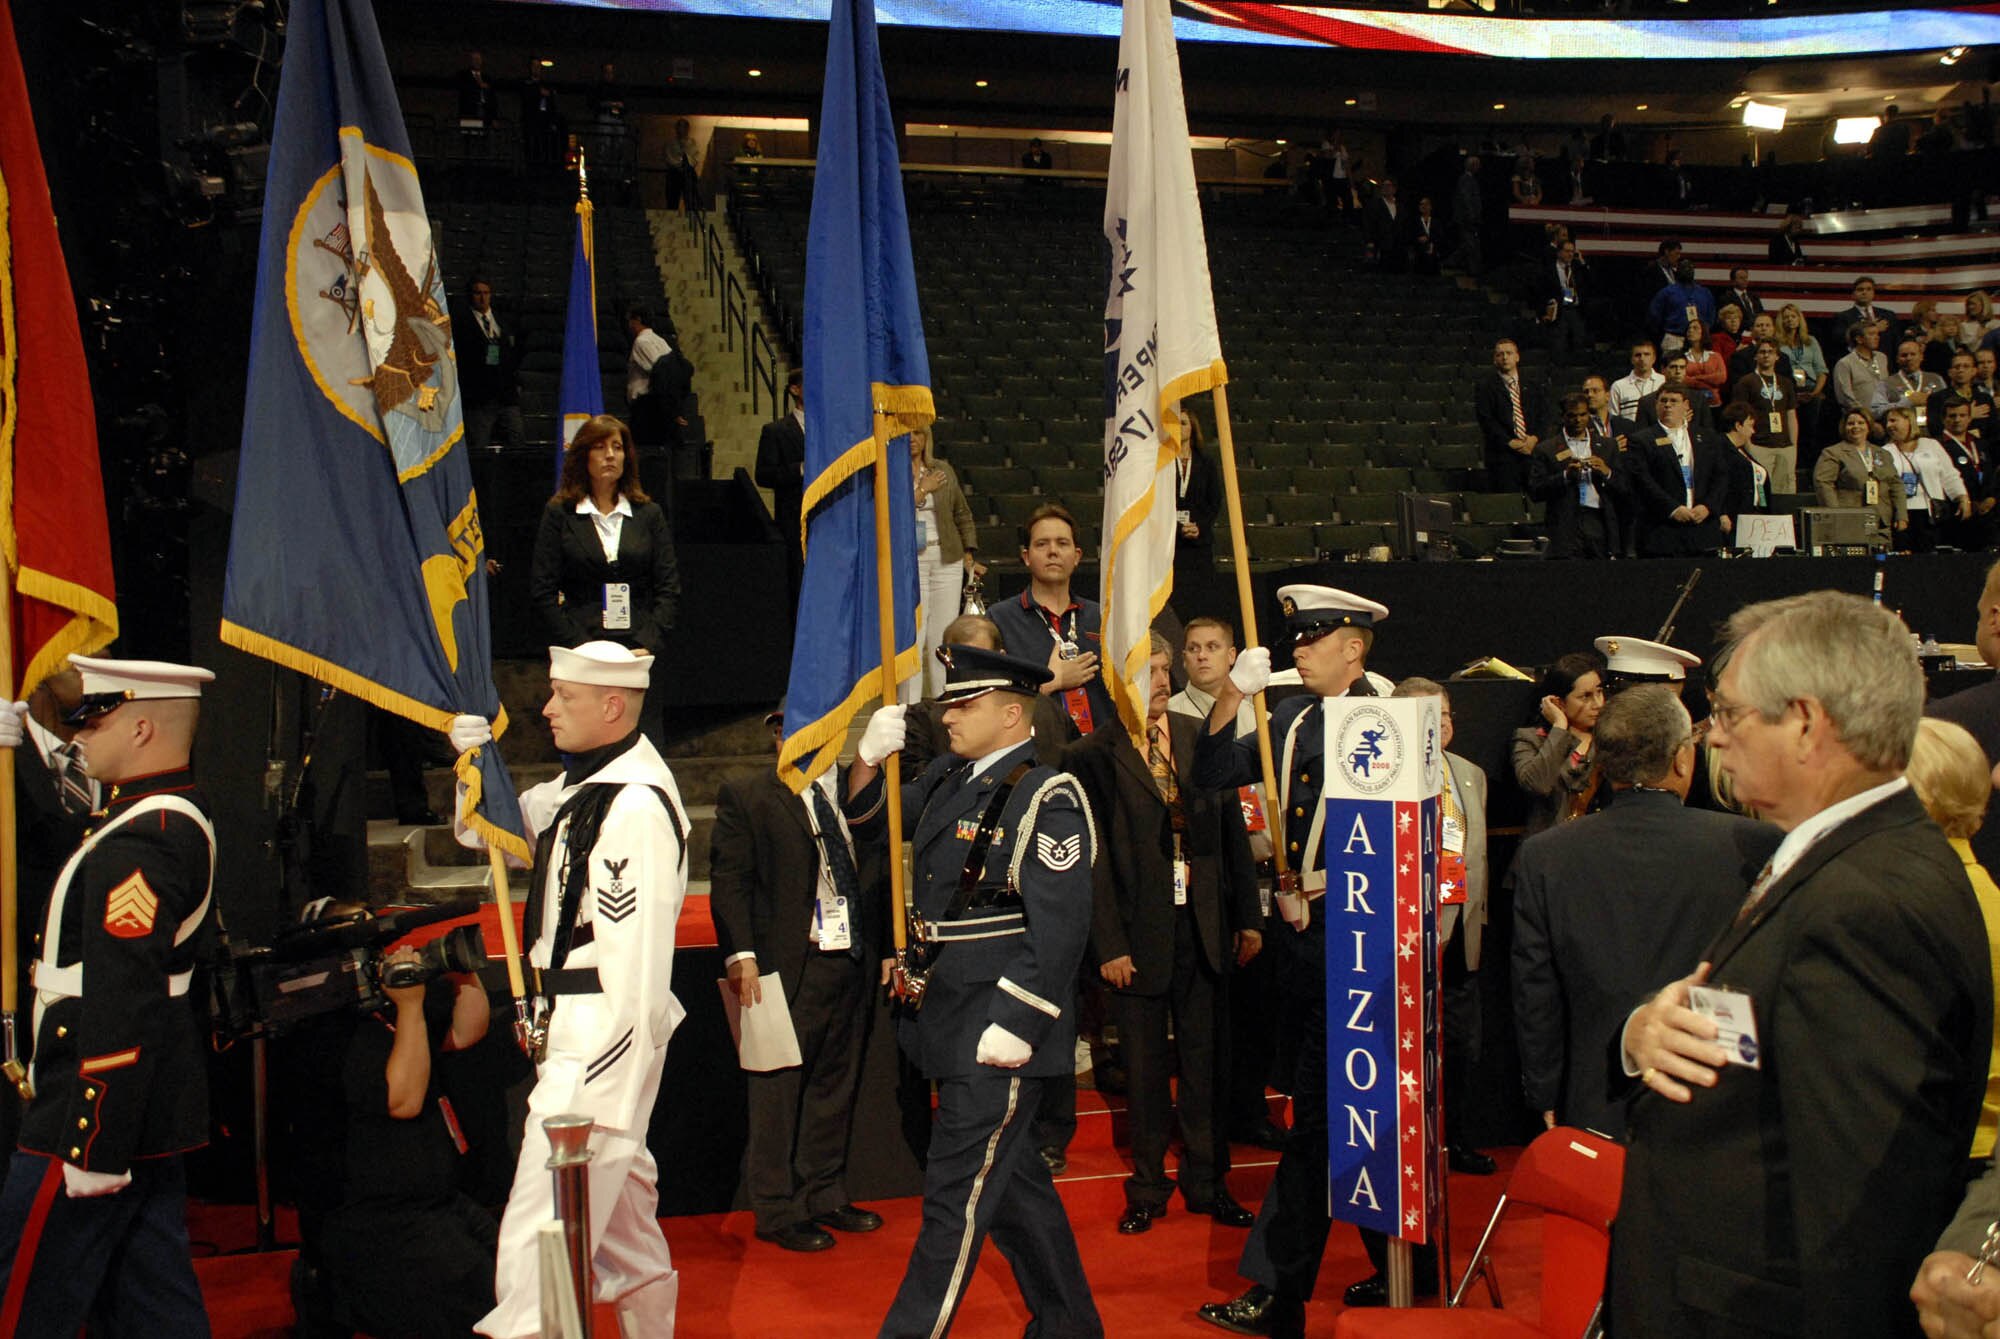 Tech. Sgt. Paul Ives(center) 934th Airlift Wing chaplain assistant, carries the Air Force Flag as part of the Joint Service Color Guard at the Republican National Convention Sept. 4. The Color Guard consists of Reservists from the Army, Navy, Air Force, Marines and Coast Guard. (Air Force Photo/Master Sgt. Paul Zadach)